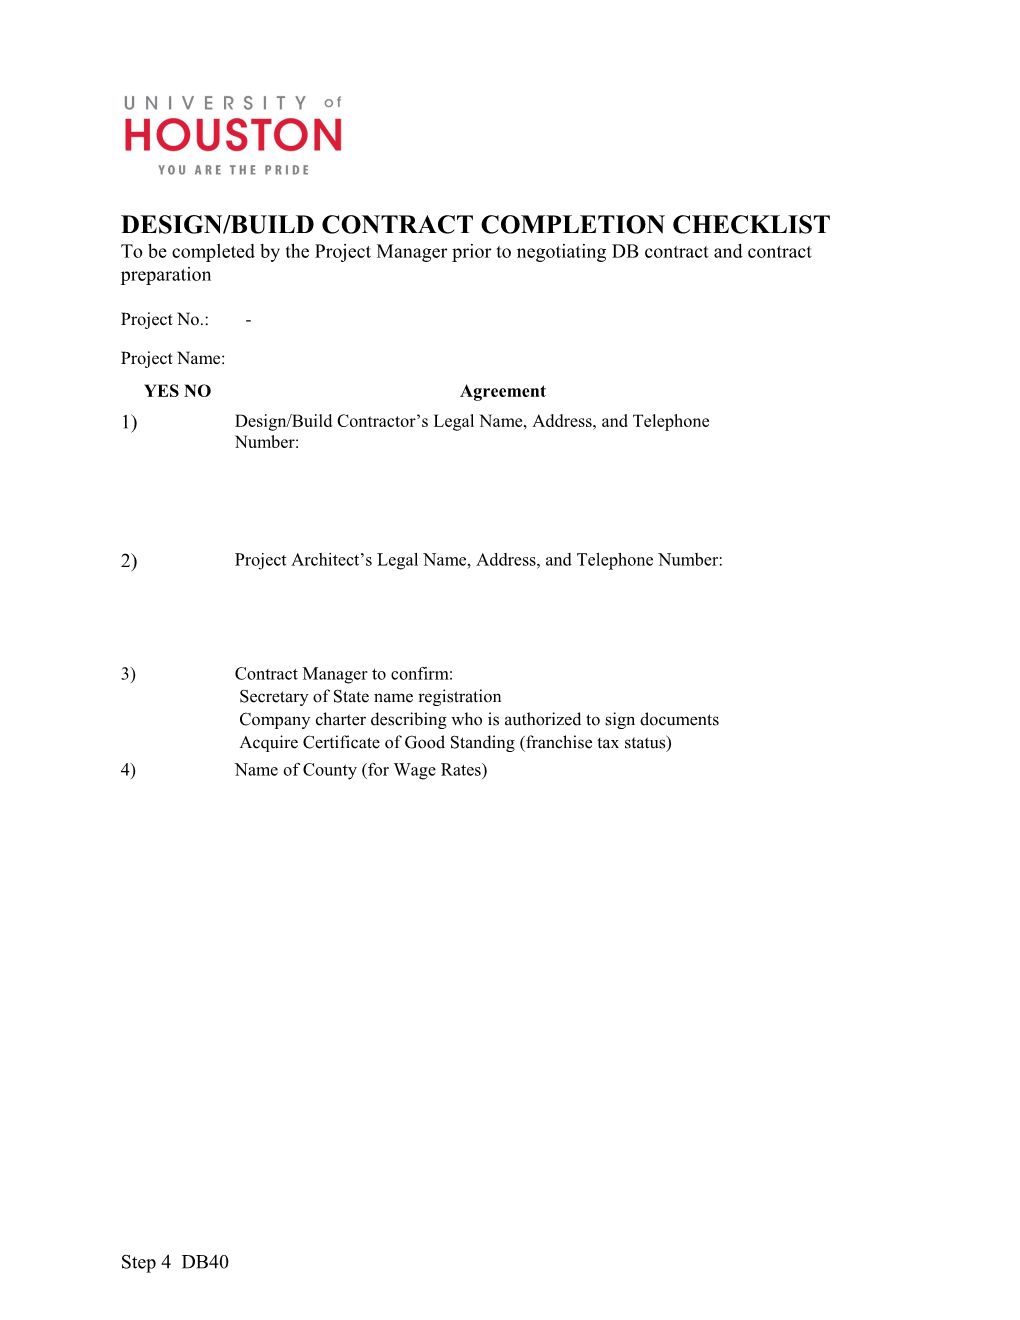 Construction Management Risk Contract Completion Checklist s1